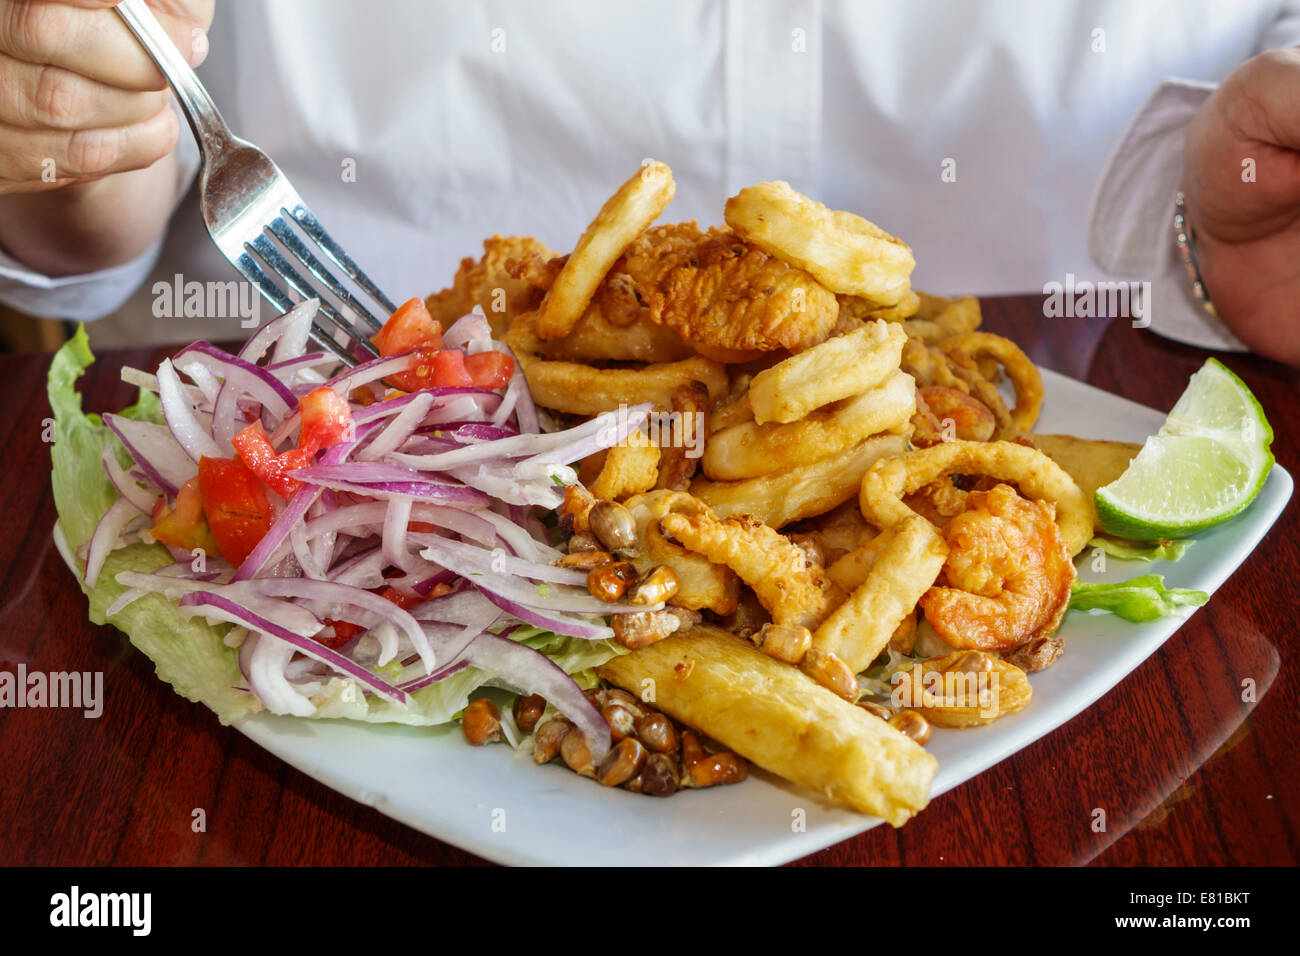 Miami Beach Florida,Chalan on the Beach,Peruvian,restaurant restaurants food dining cafe cafes,plate,dish,food,seafood,platter,fried,FL140305078 Stock Photo